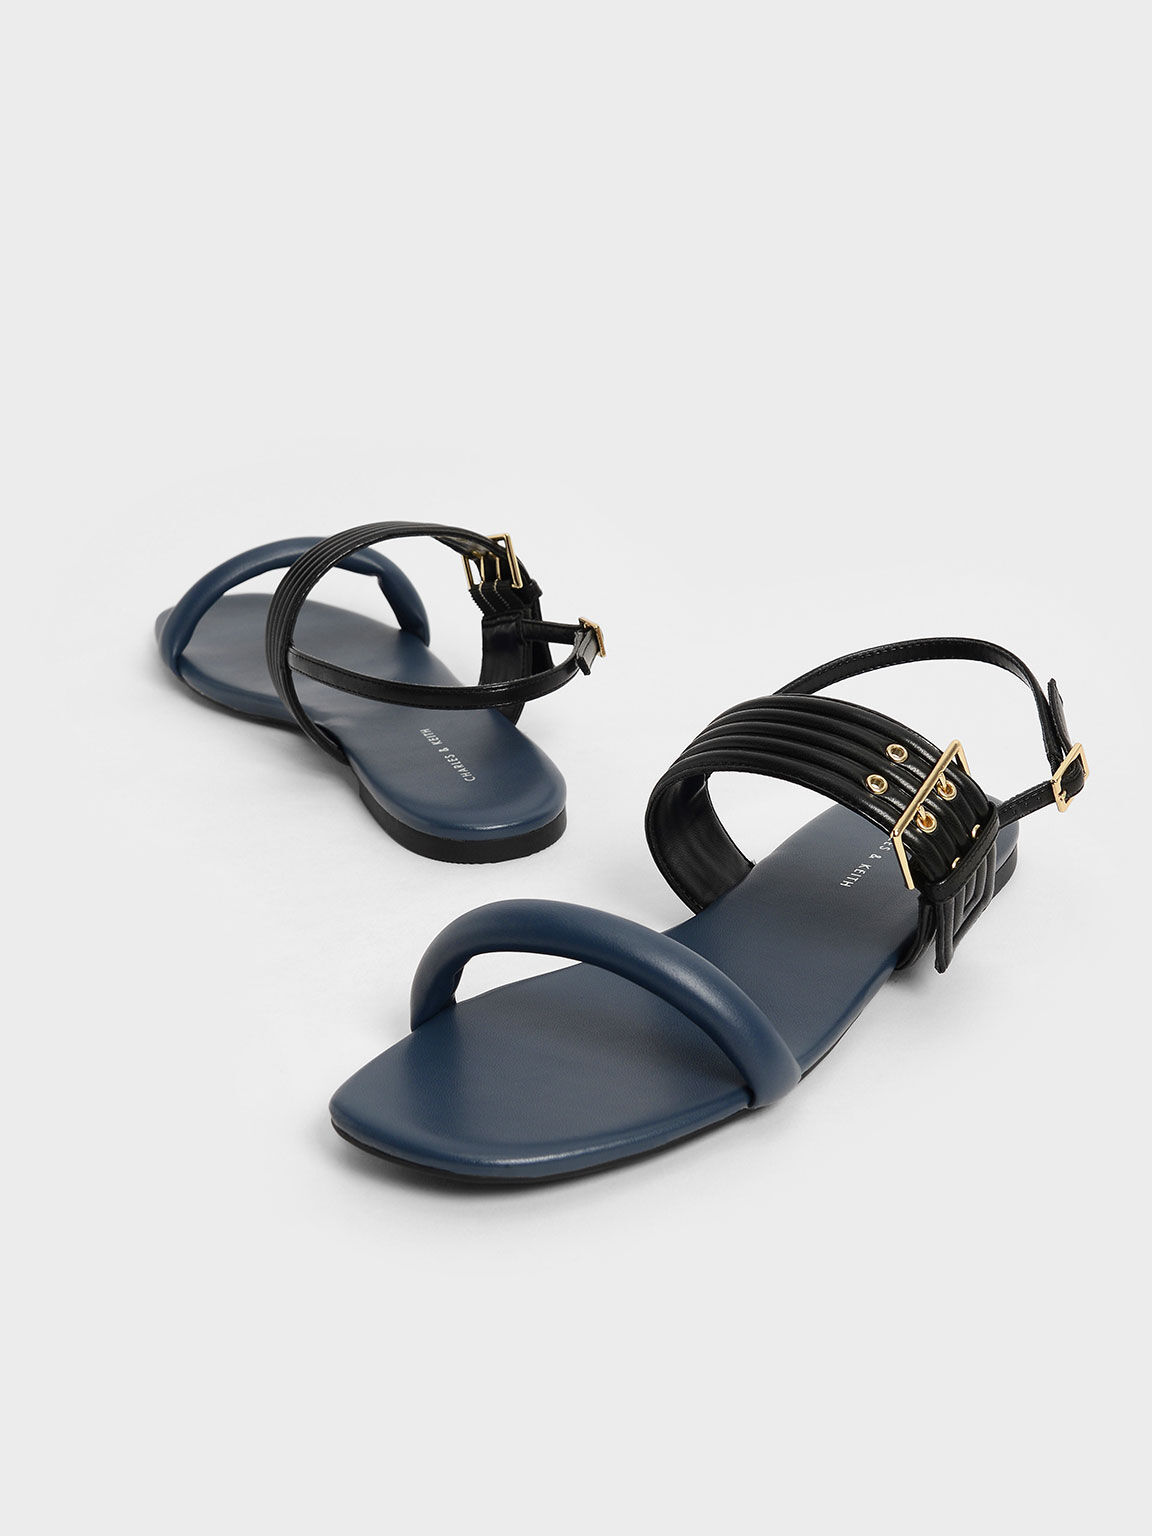 Two-Tone Puffy Grommet Sandals, Blue, hi-res